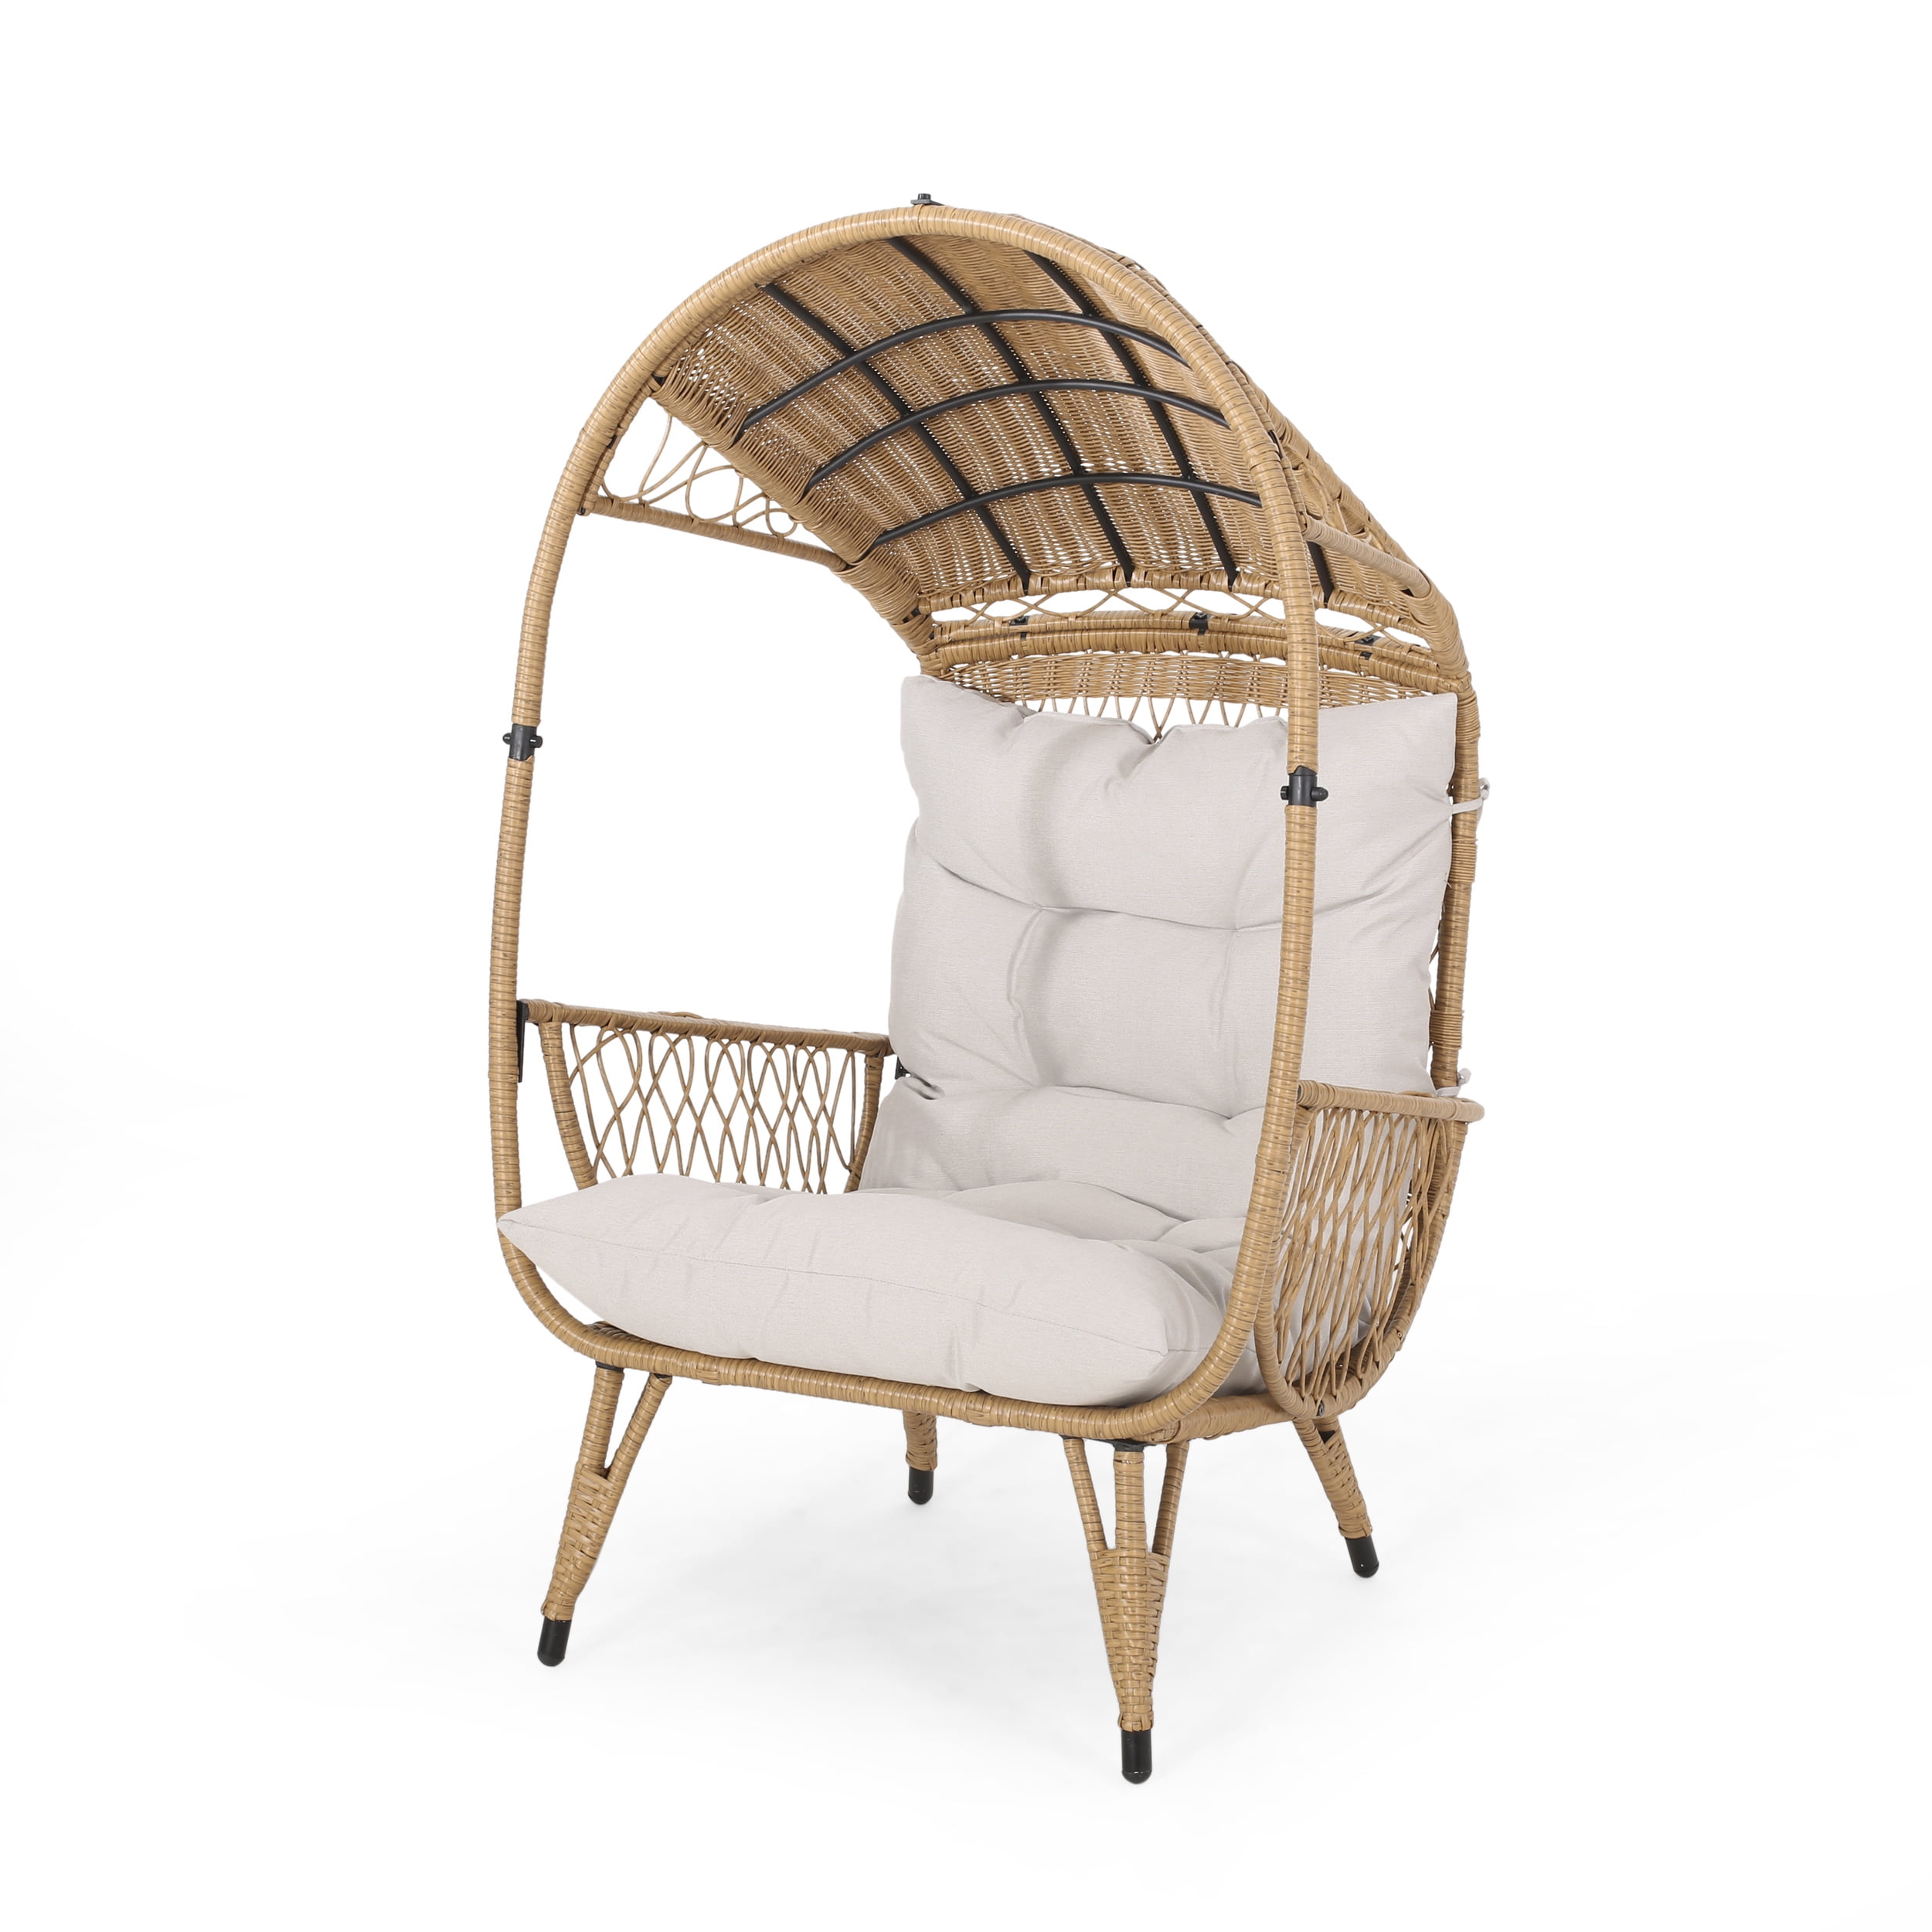 Kina Anoi Nysgerrighed Maurice Outdoor Wicker Standing Basket Chair with Cushion, Light Brown,  Beige - Walmart.com